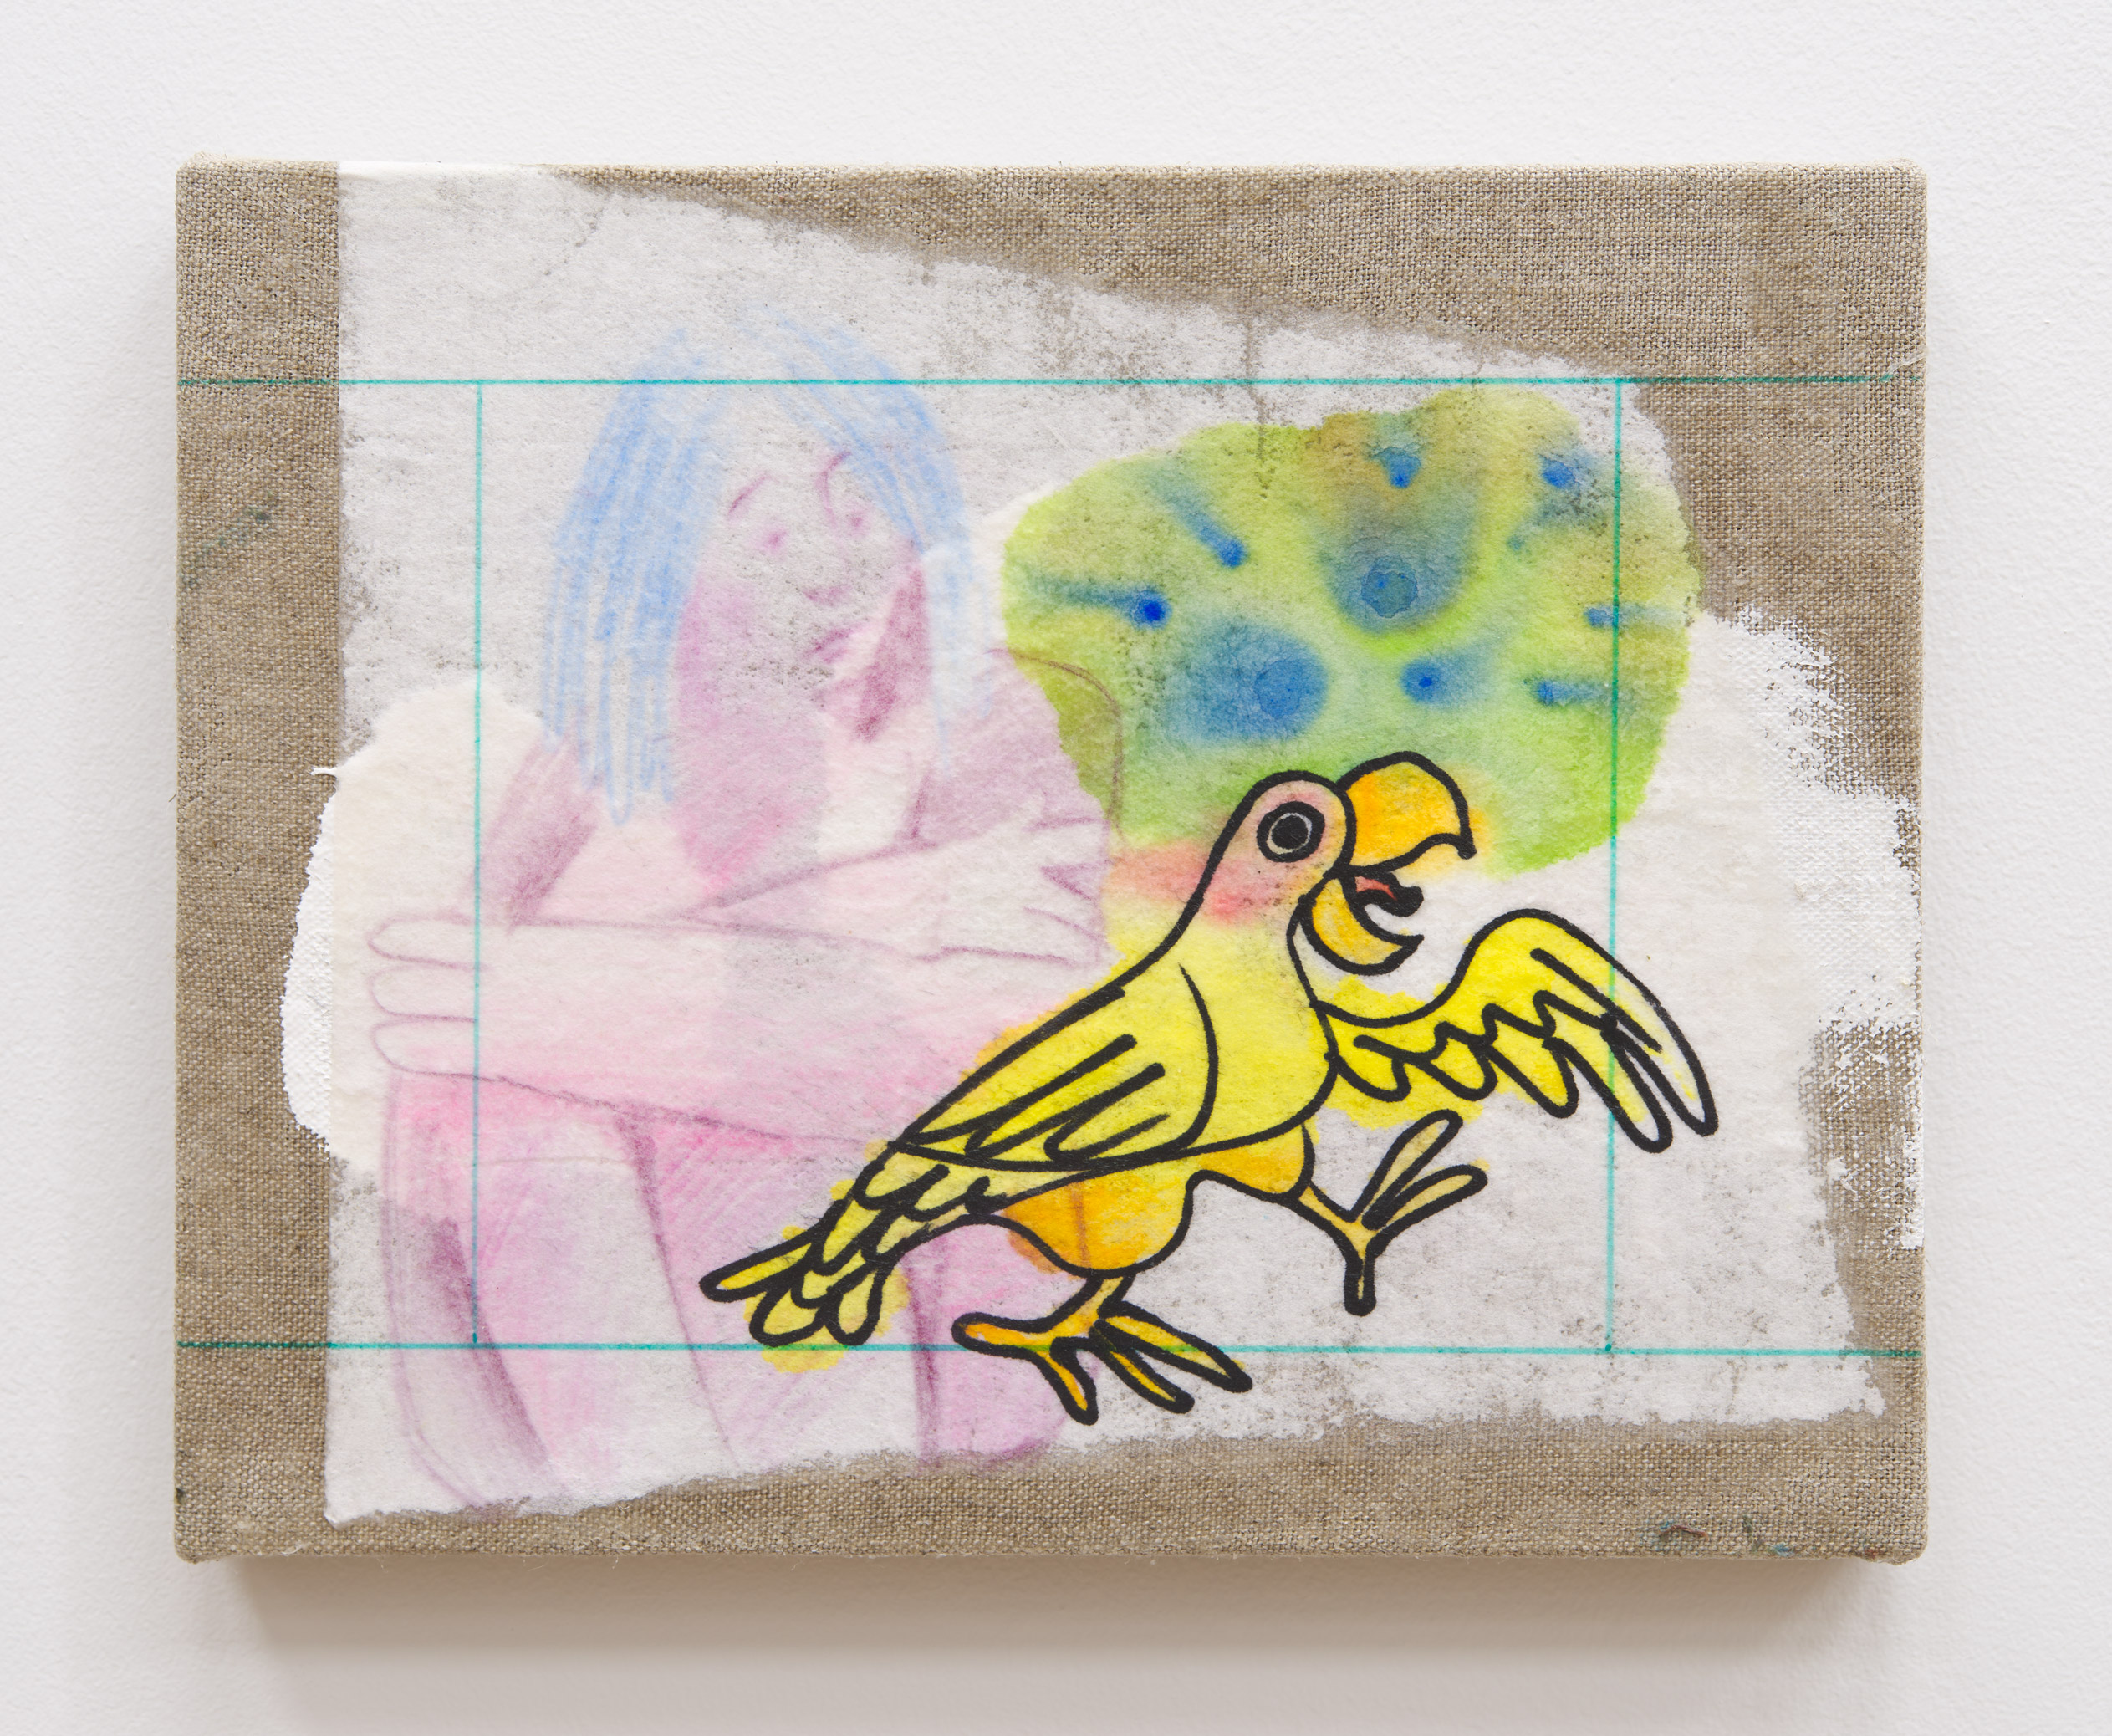 Daniel Boccato, parrotpainting, 2020, Colored pencil, felt tip marker, gesso, ink, linen, paper, pva adhesive, watercolor, wood, 8 x 10 x 1 in.